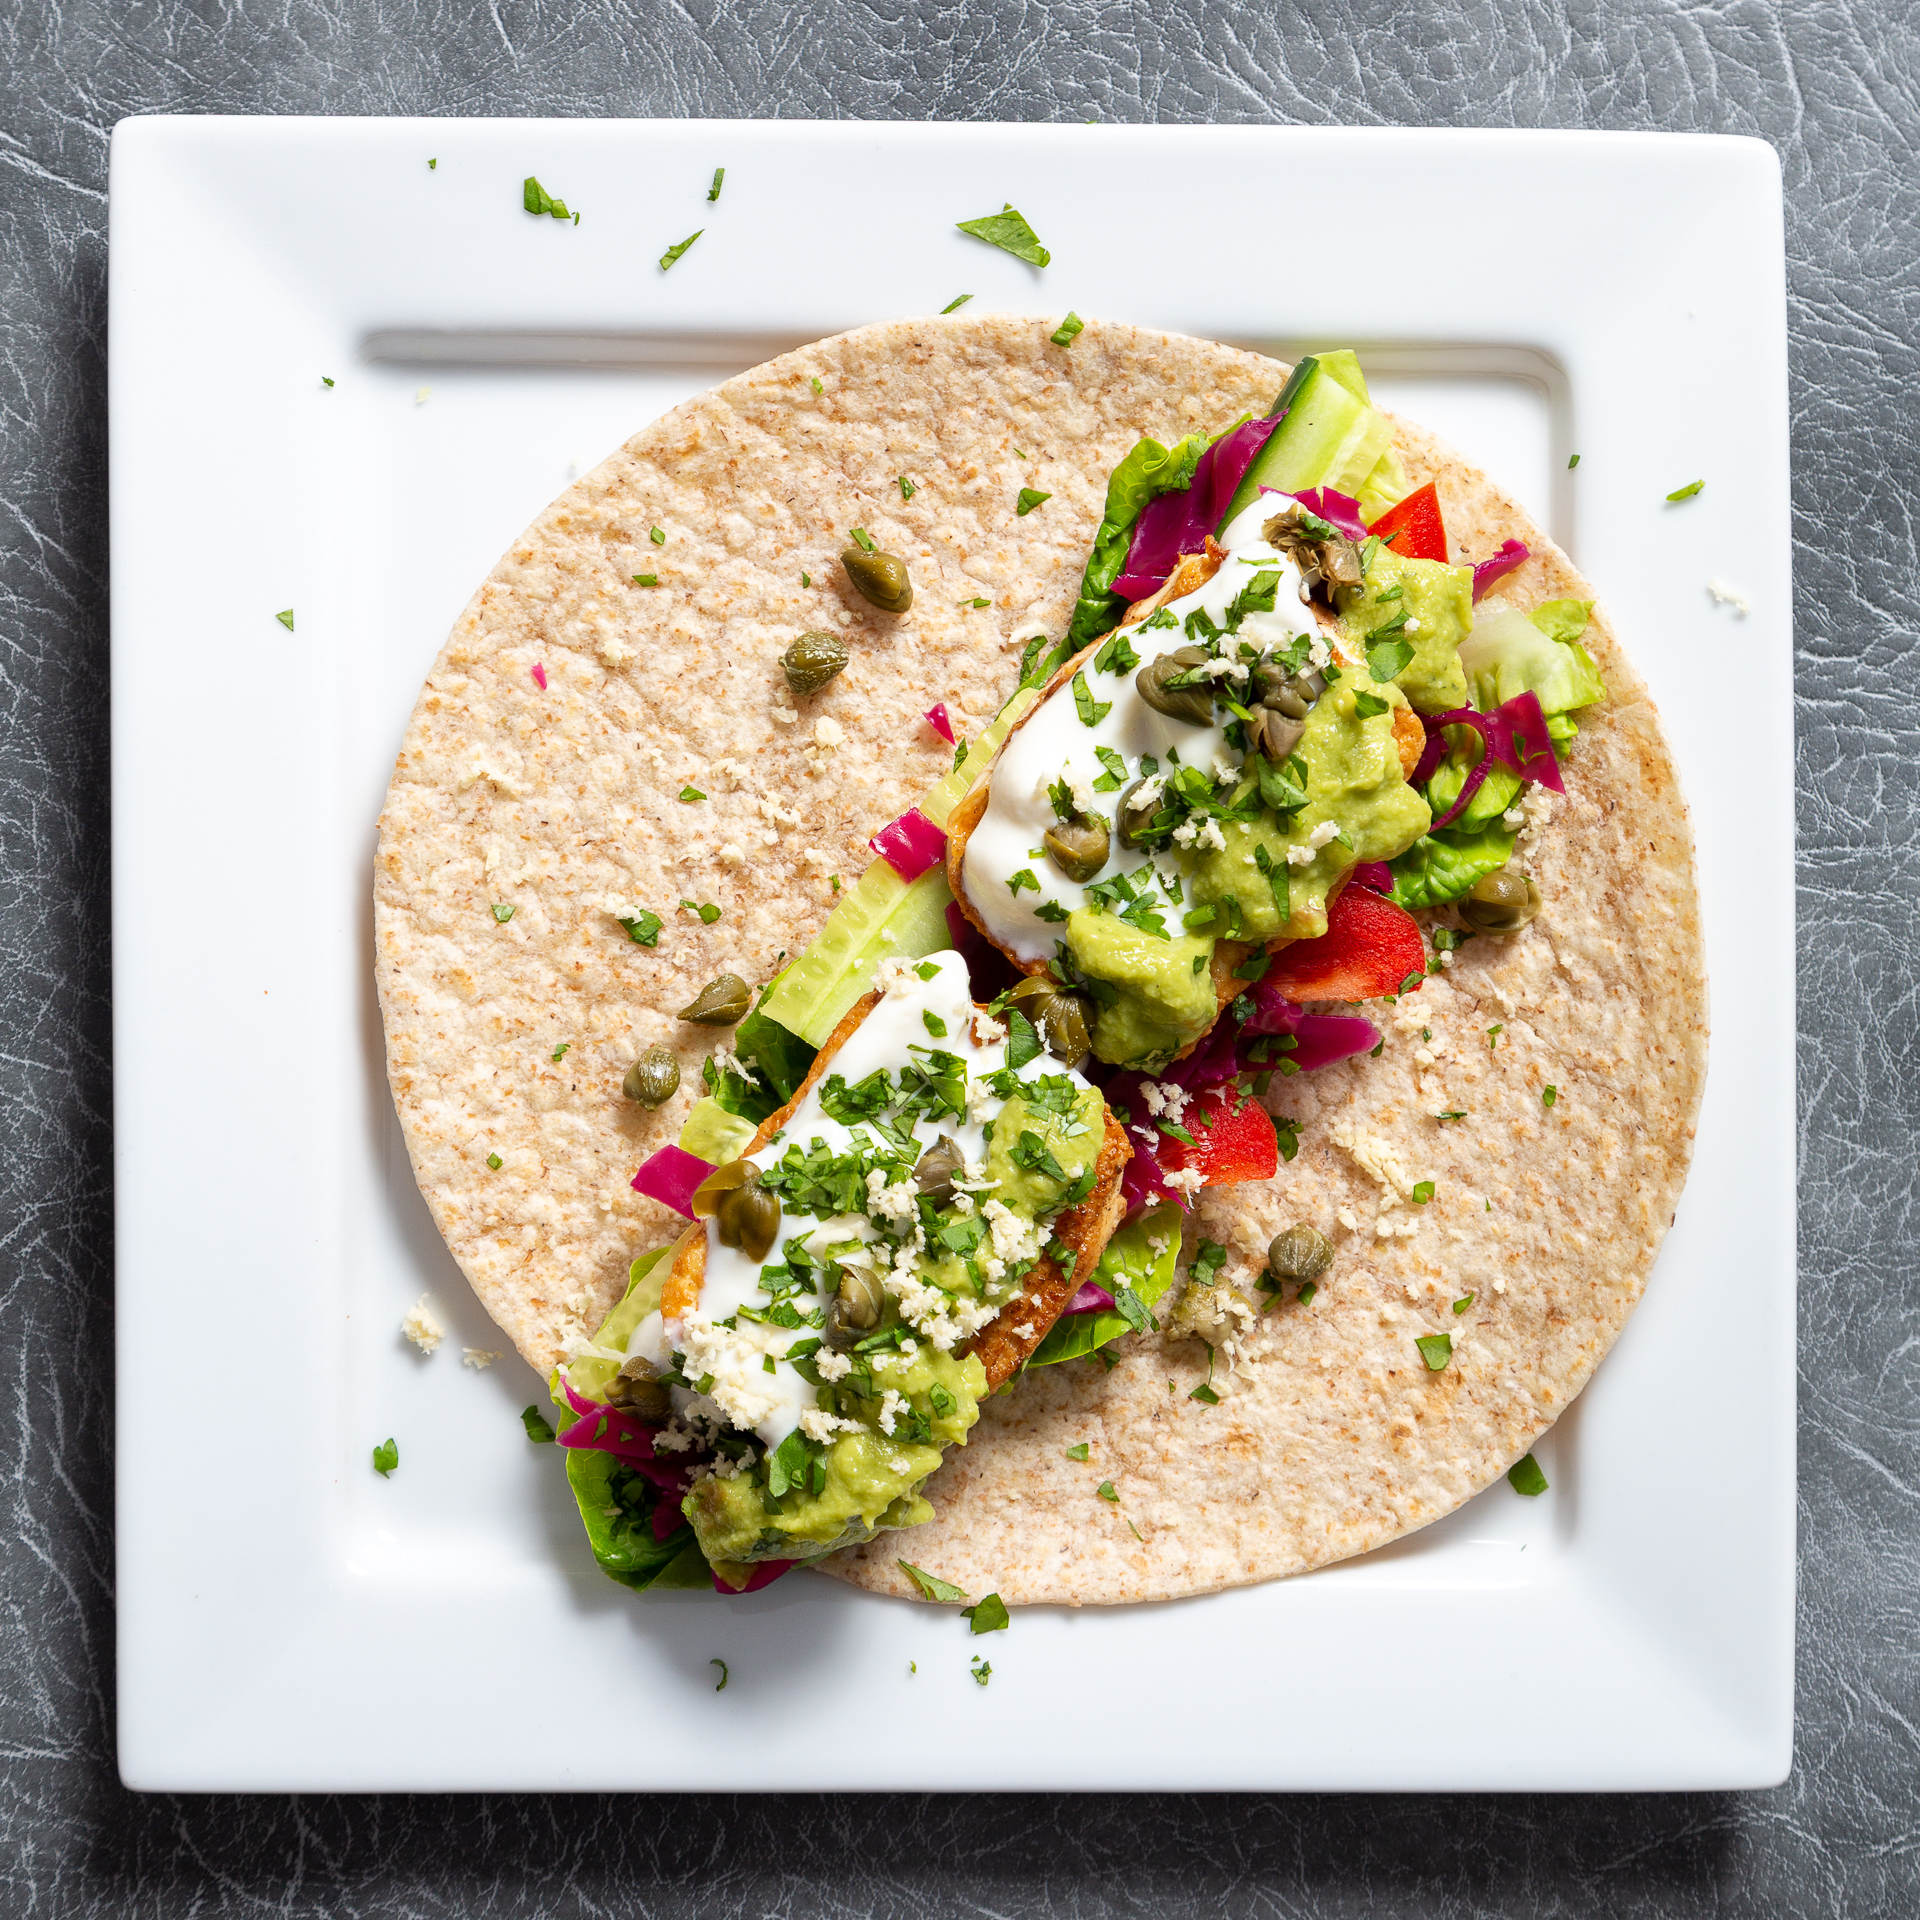 vegan wrap with tofu, guacamole and capers